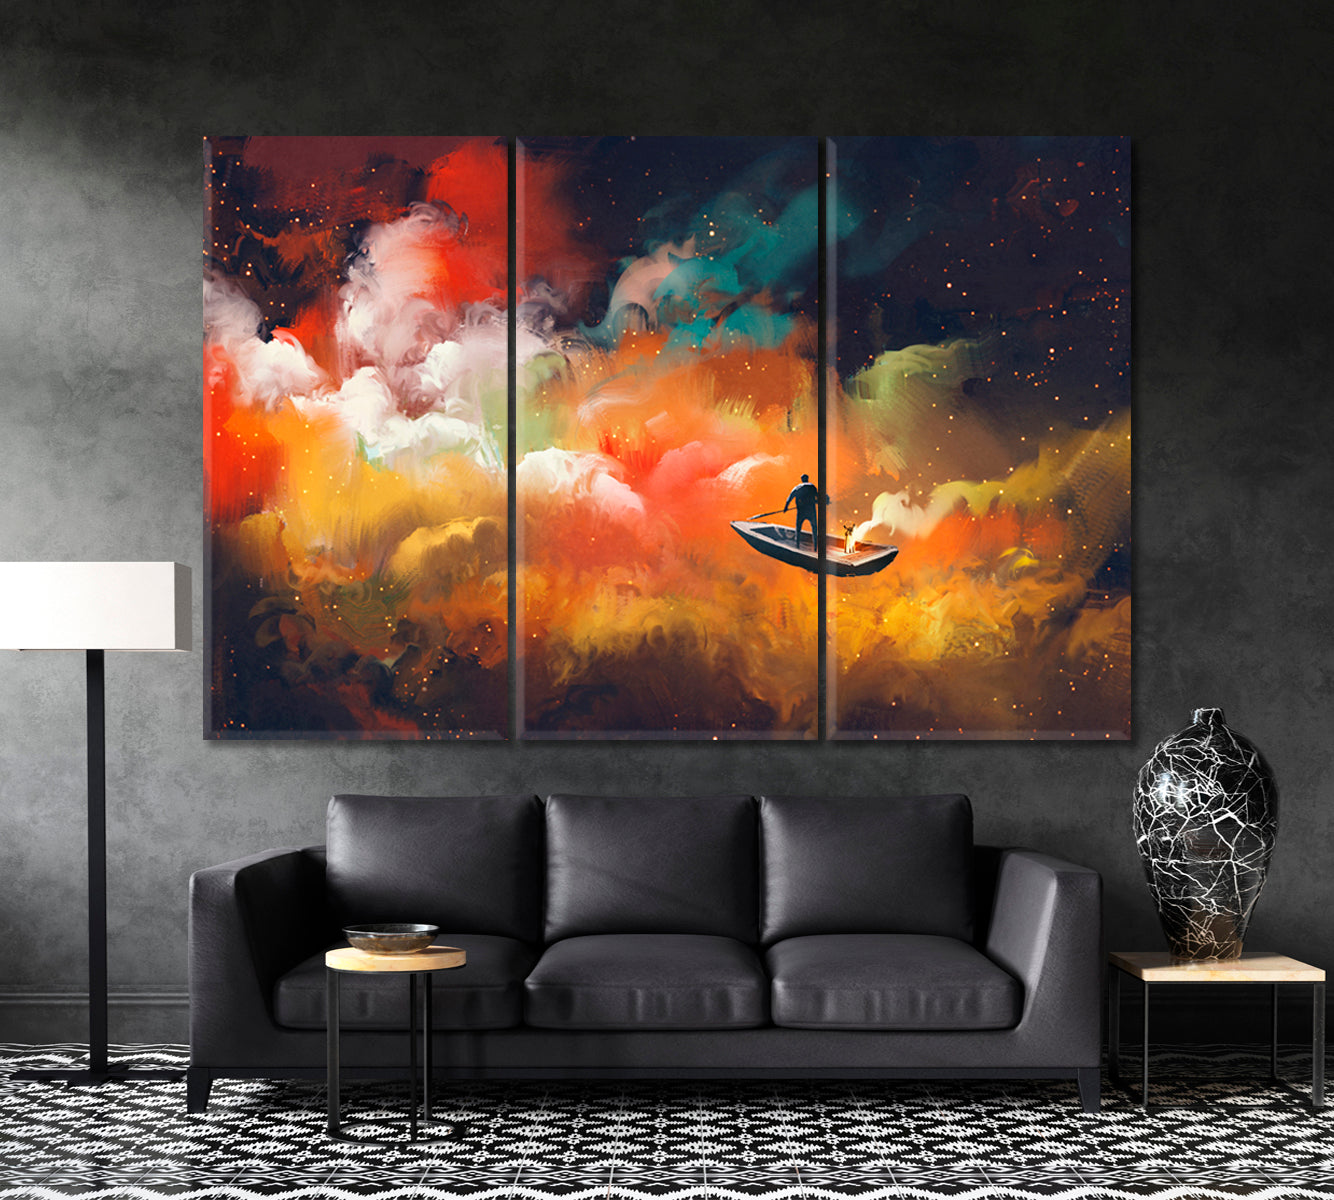 Surreal Dreamlike Man on Boat Outer Space Colorful Clouds Surreal Fantasy Large Art Print Décor Artesty 3 panels 36" x 24" 